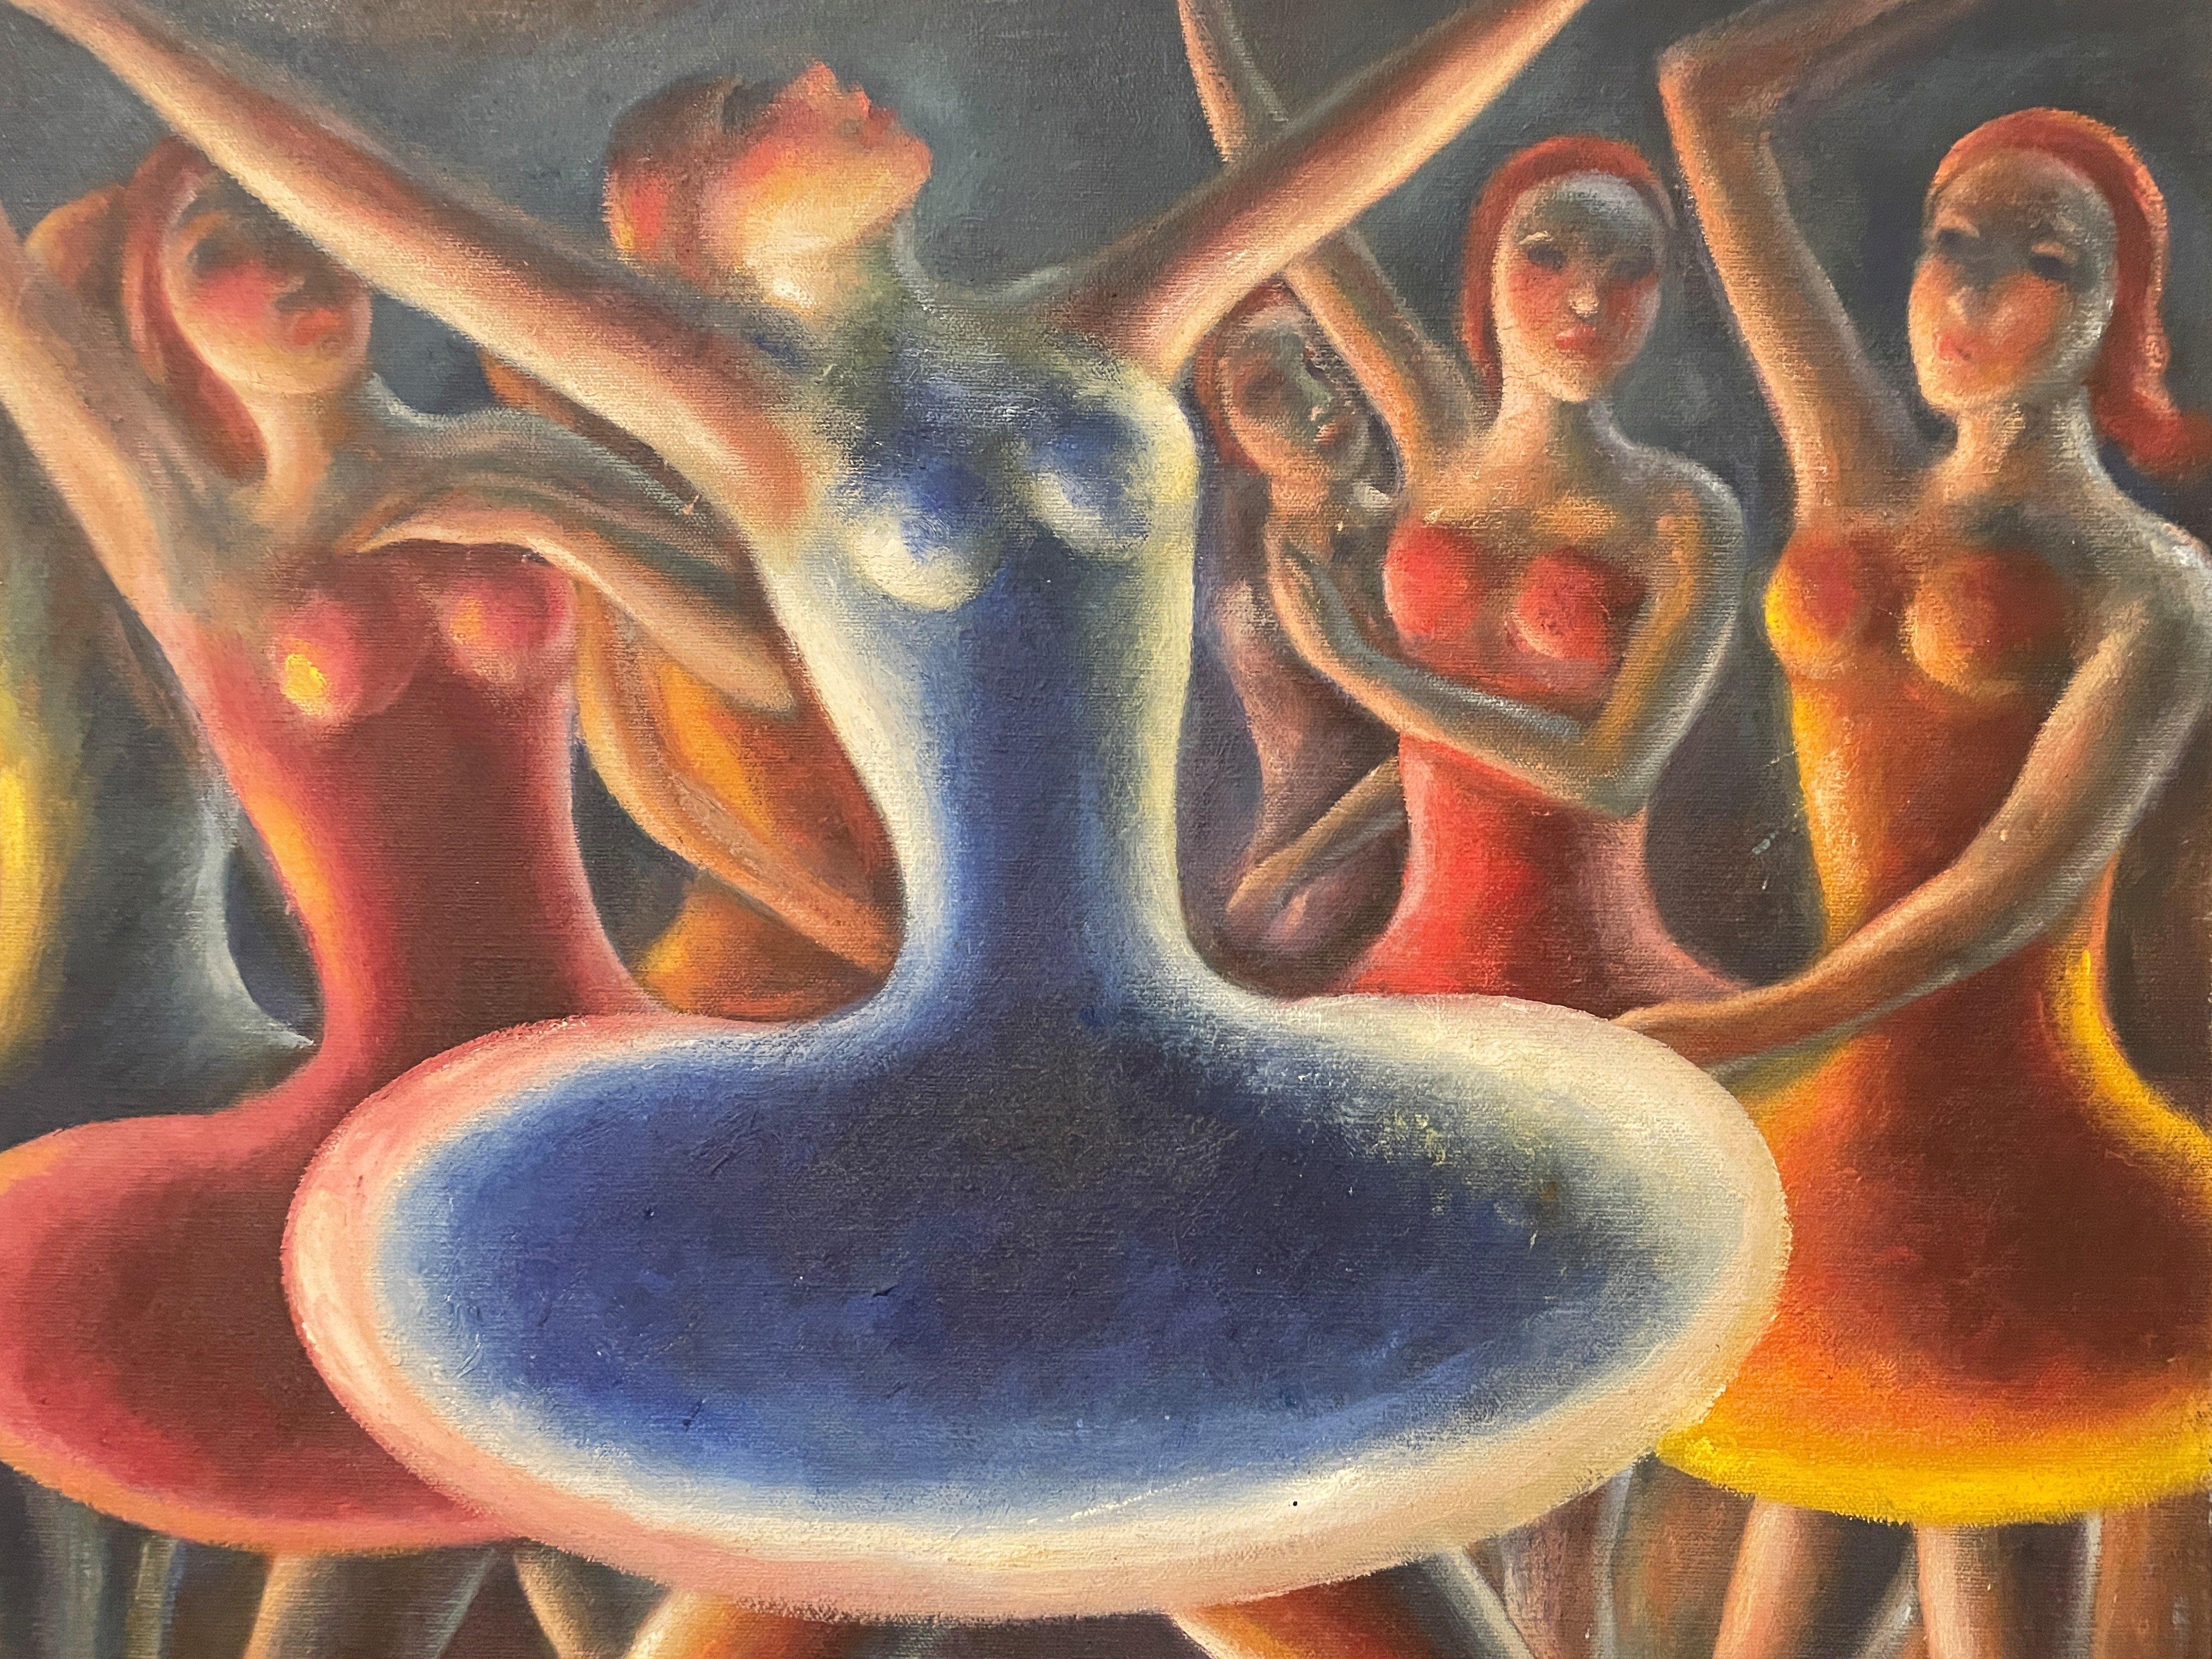 Paul Raphael Meltsner (1905 - 1966)
Ballerina Dancers, circa 1940
Oil on canvas
30 x 24 inches
Signed lower left

Provenance:
Private Collection, Nyack, New York

In the final years of the 1930s, Paul Meltsner created six oil paintings of Martha